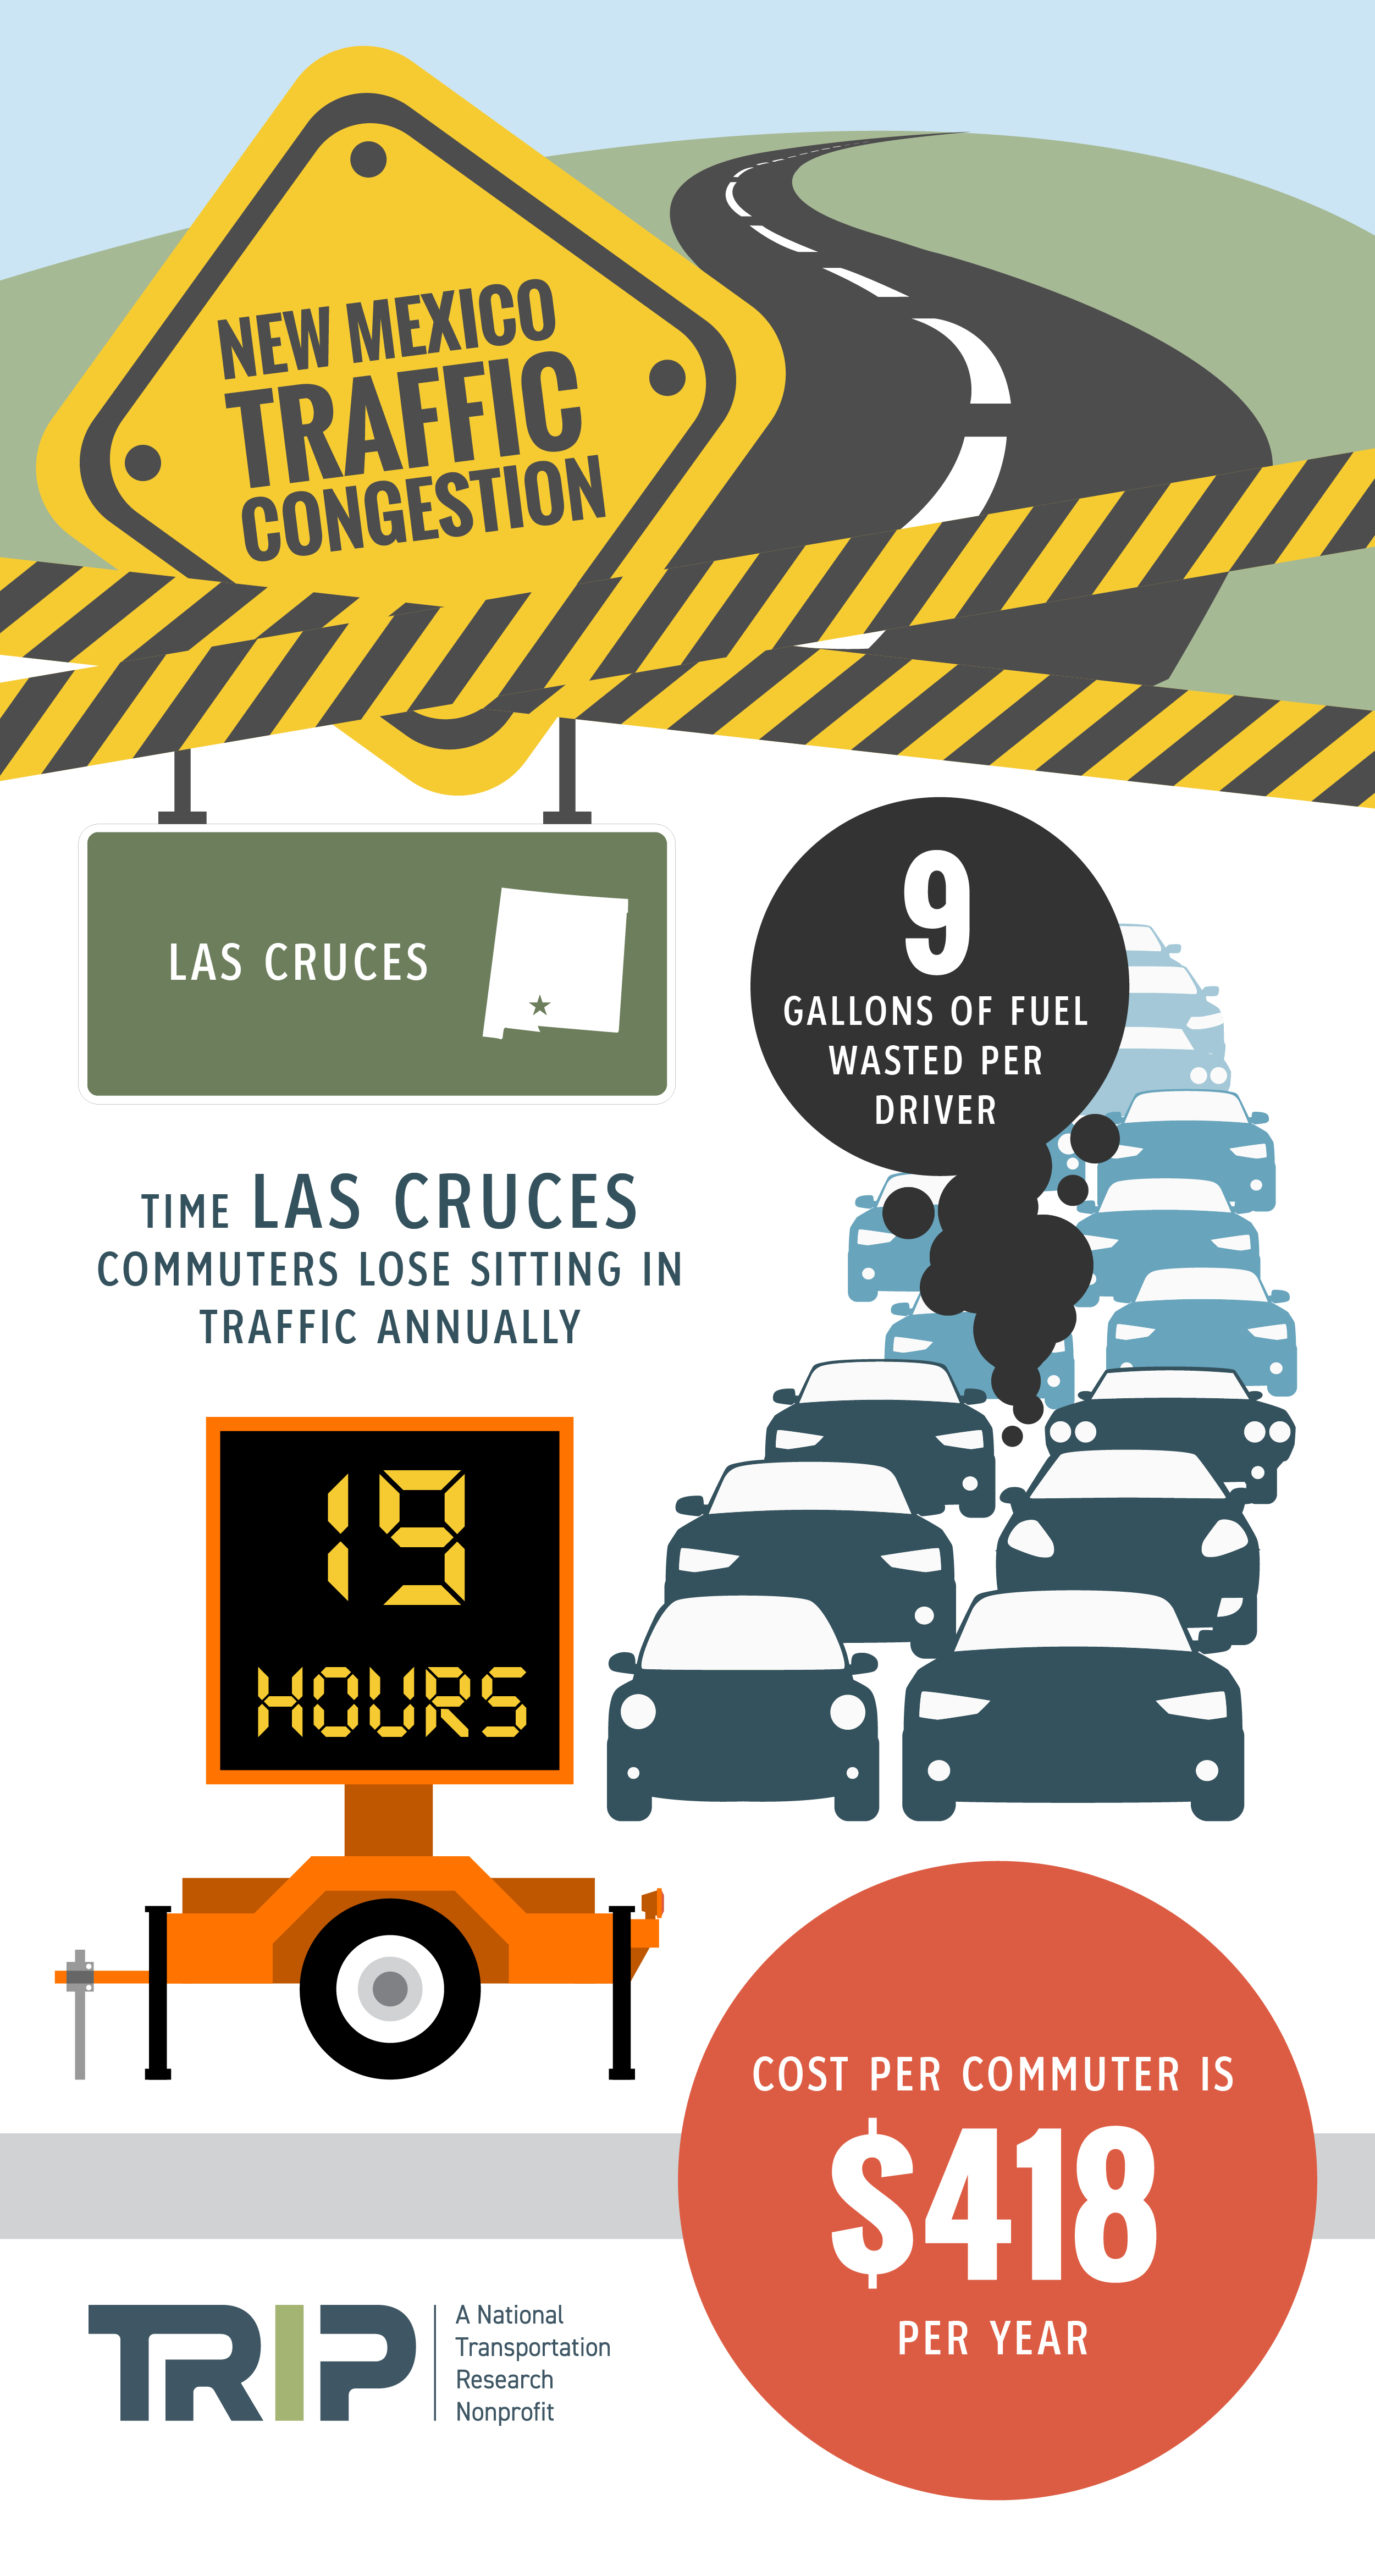 Las Cruces Traffic Congestion Infographic – January 2022